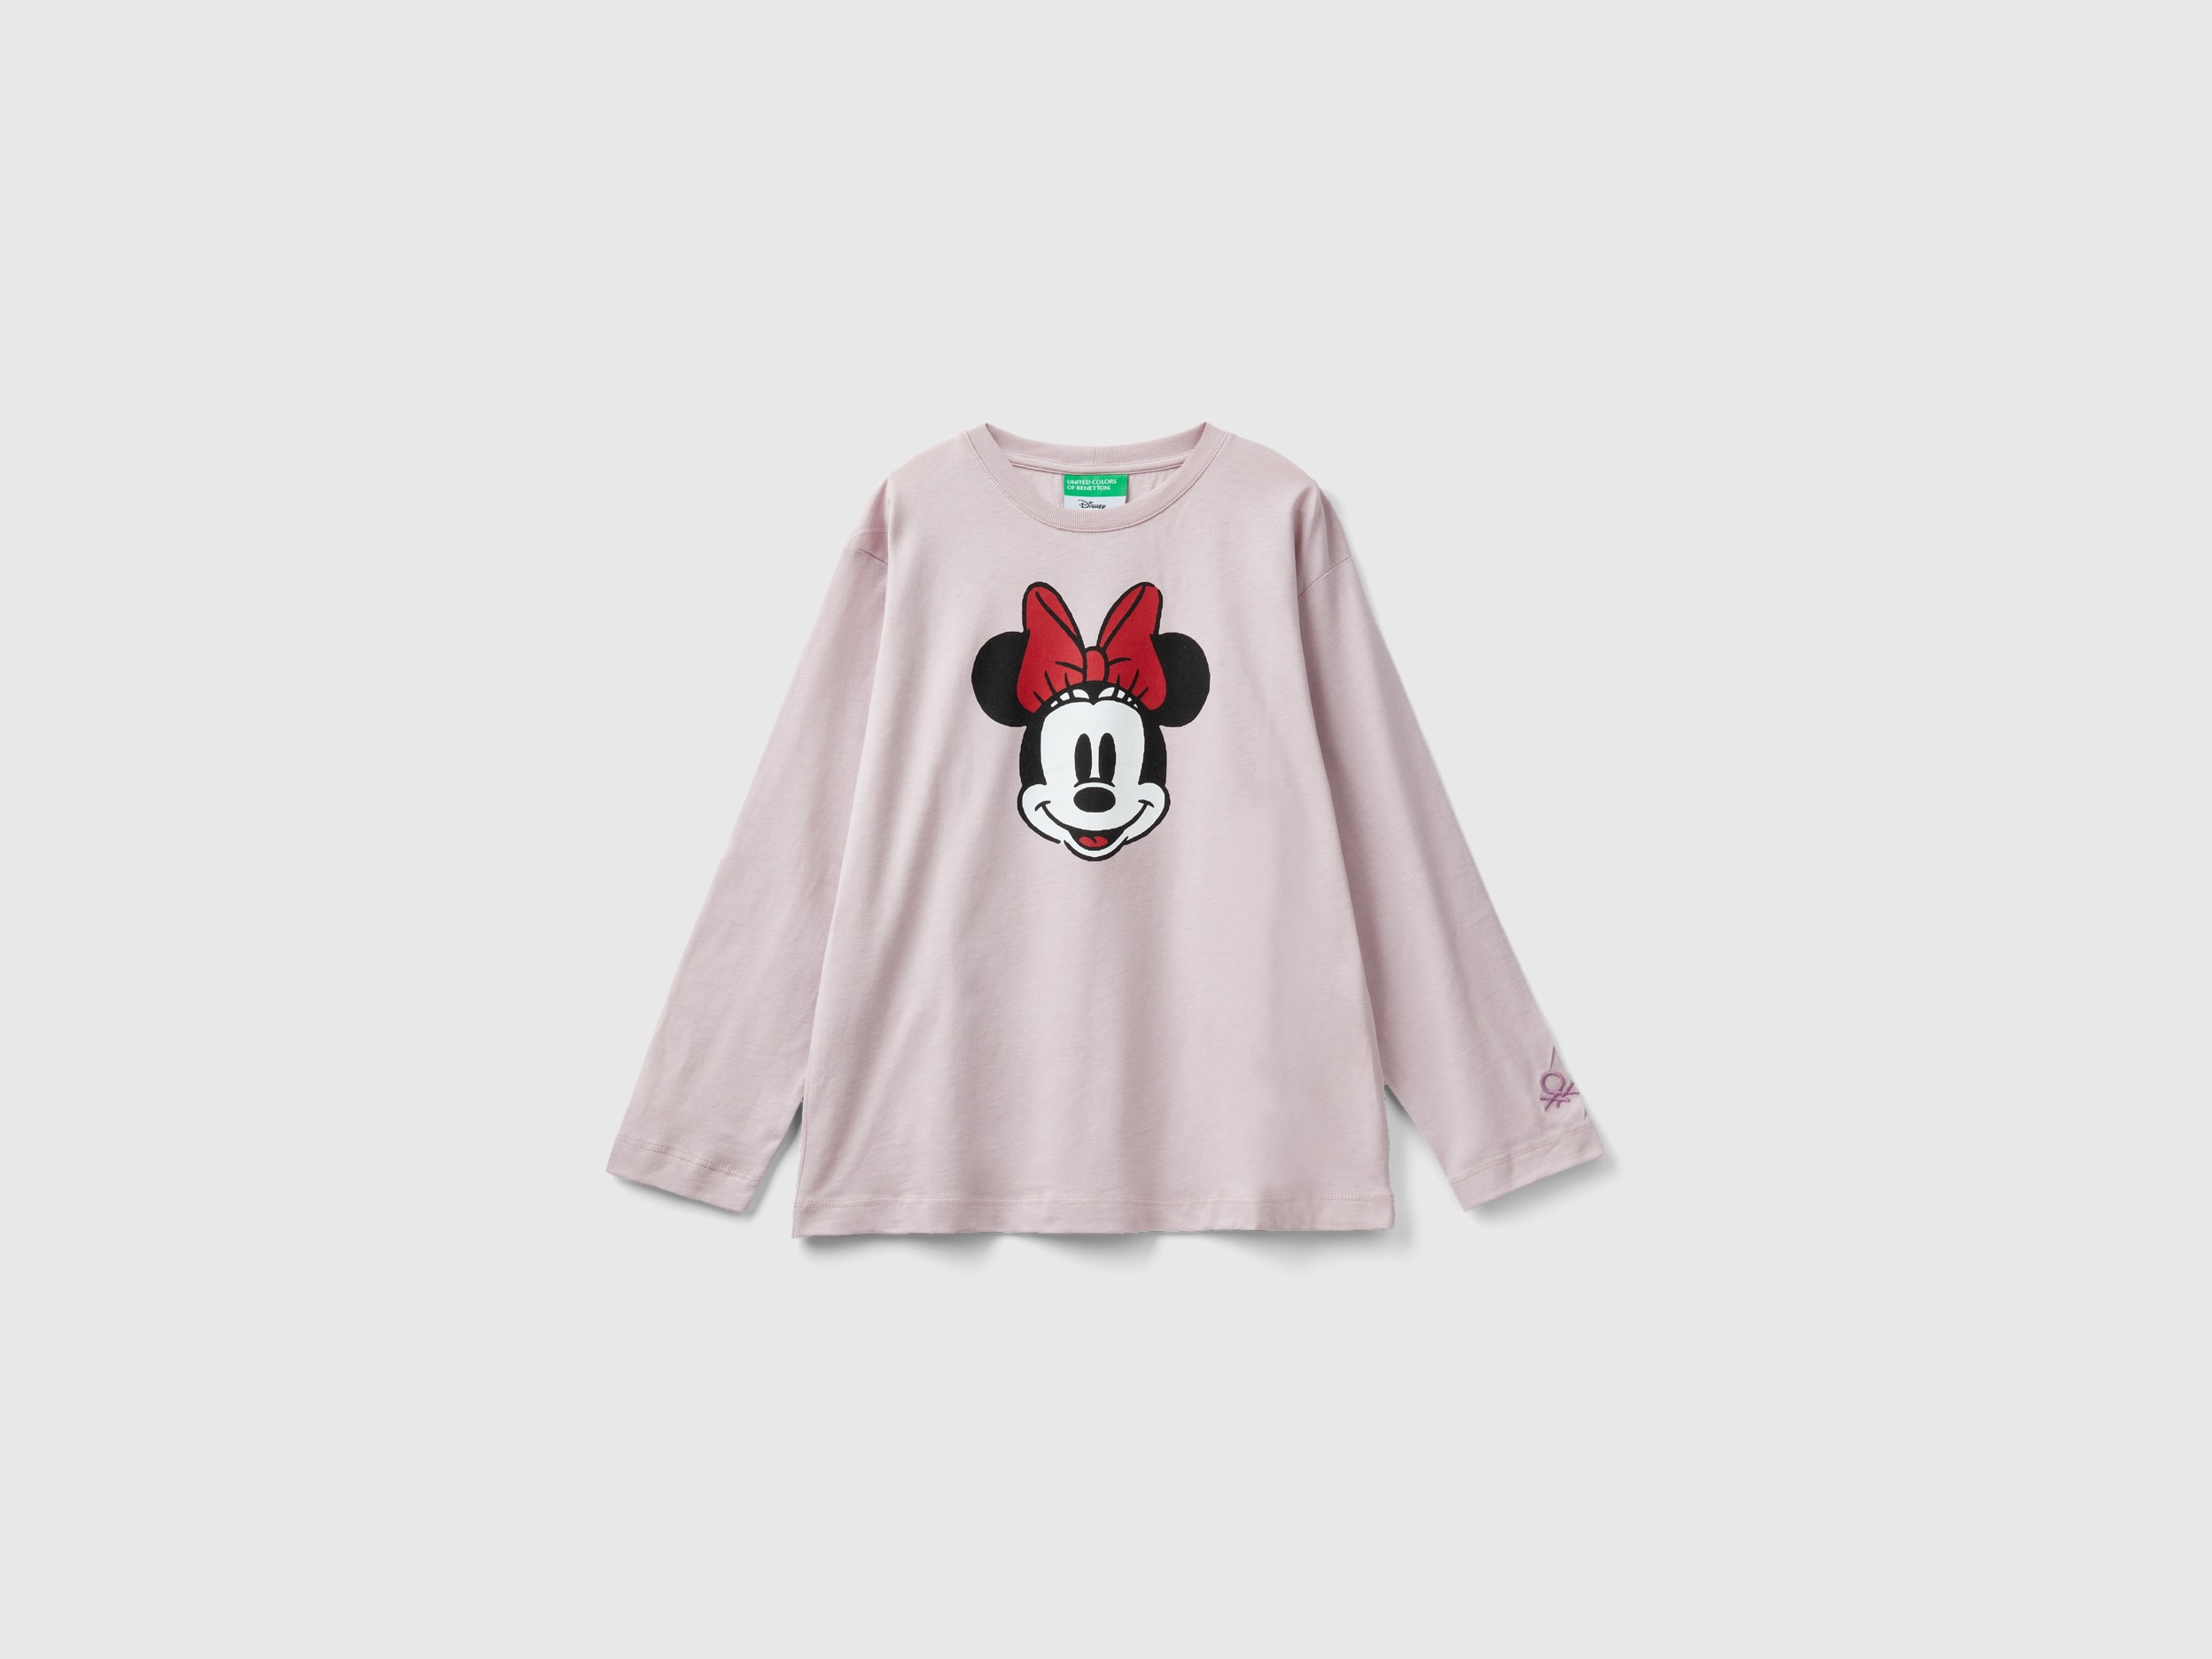 Benetton, Pink T-shirt With Minnie Mouse Print, size 3XL, Pink, Kids